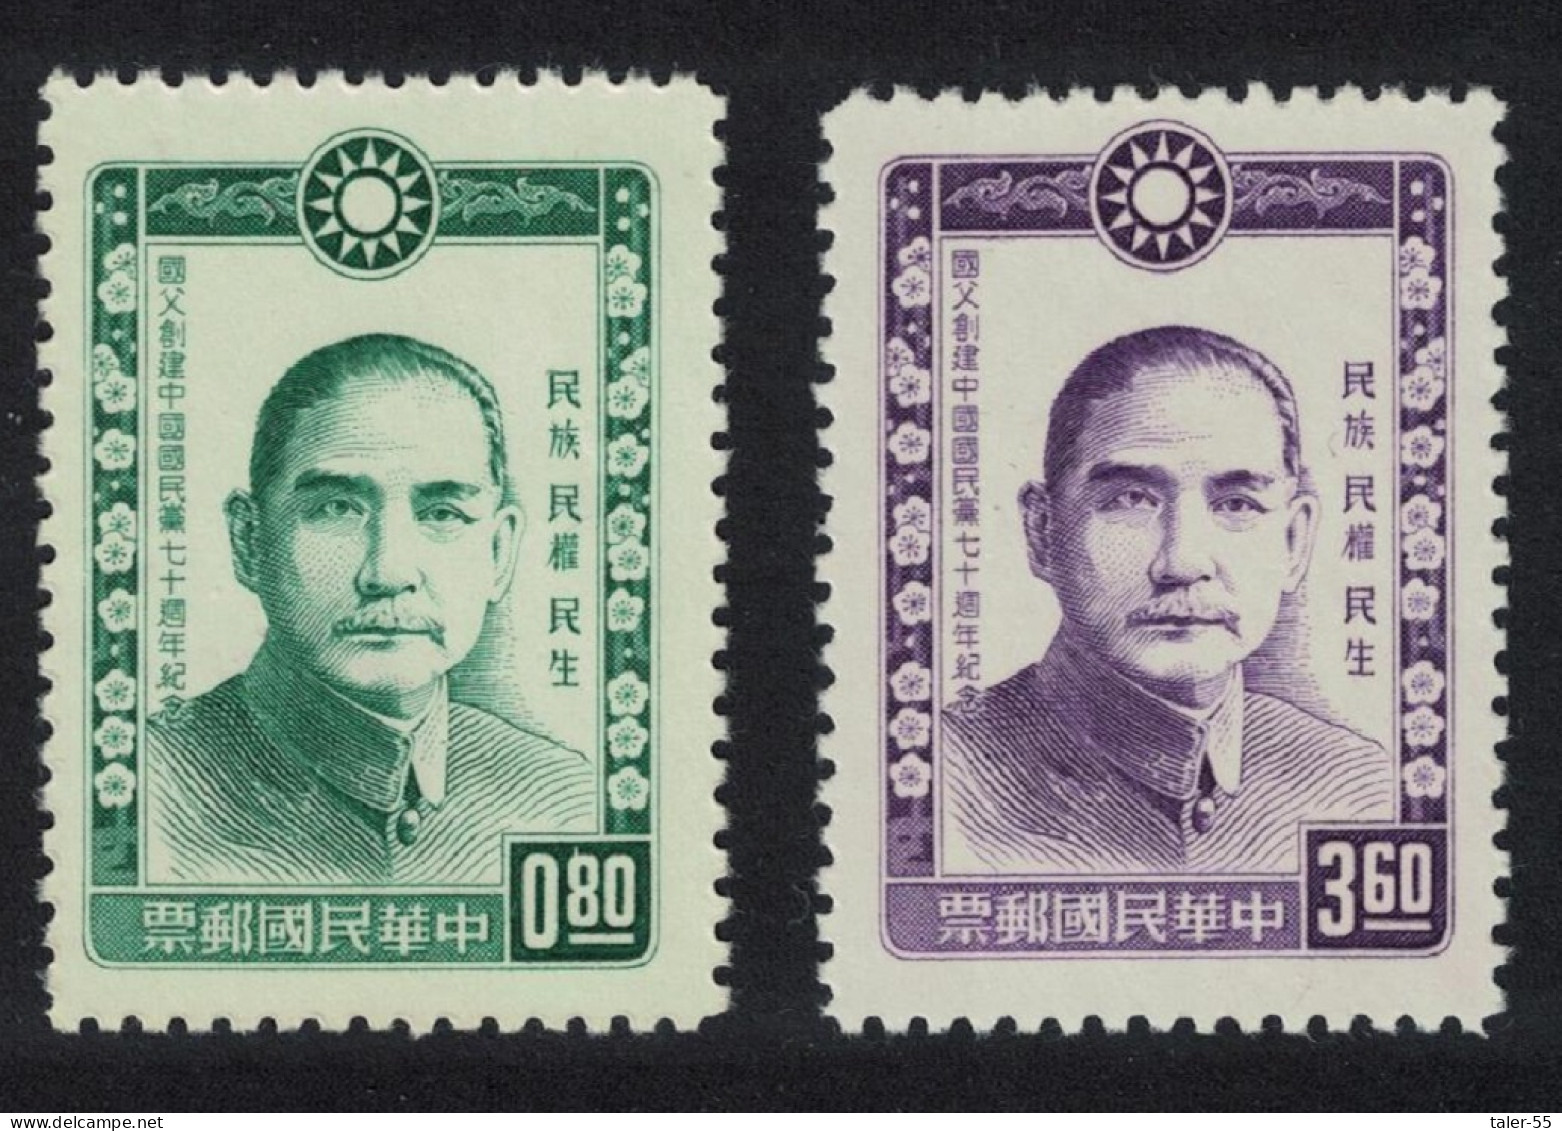 Taiwan Dr Sun Yat-sen 70th Anniversary Of Kuomintang 2v 1964 MNH SG#533-534 MI#555-556 - Unused Stamps